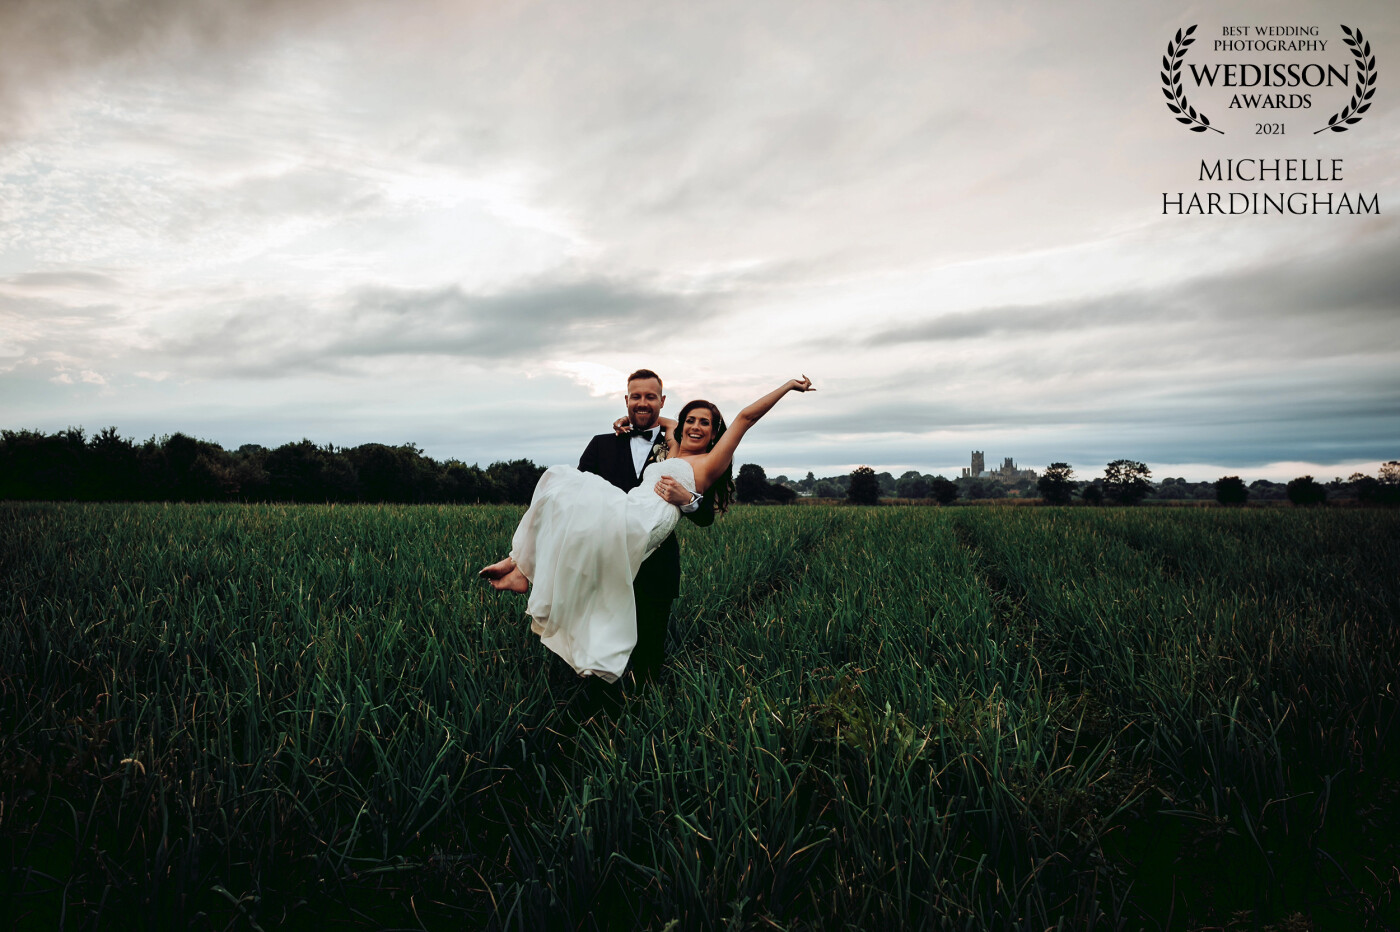 Its not always necessary to be calm and collected - sometimes we just need to kick off a shoes and chase the sunset. Taken at the wedding of Matt and Lauren at The Old Hall Ely.